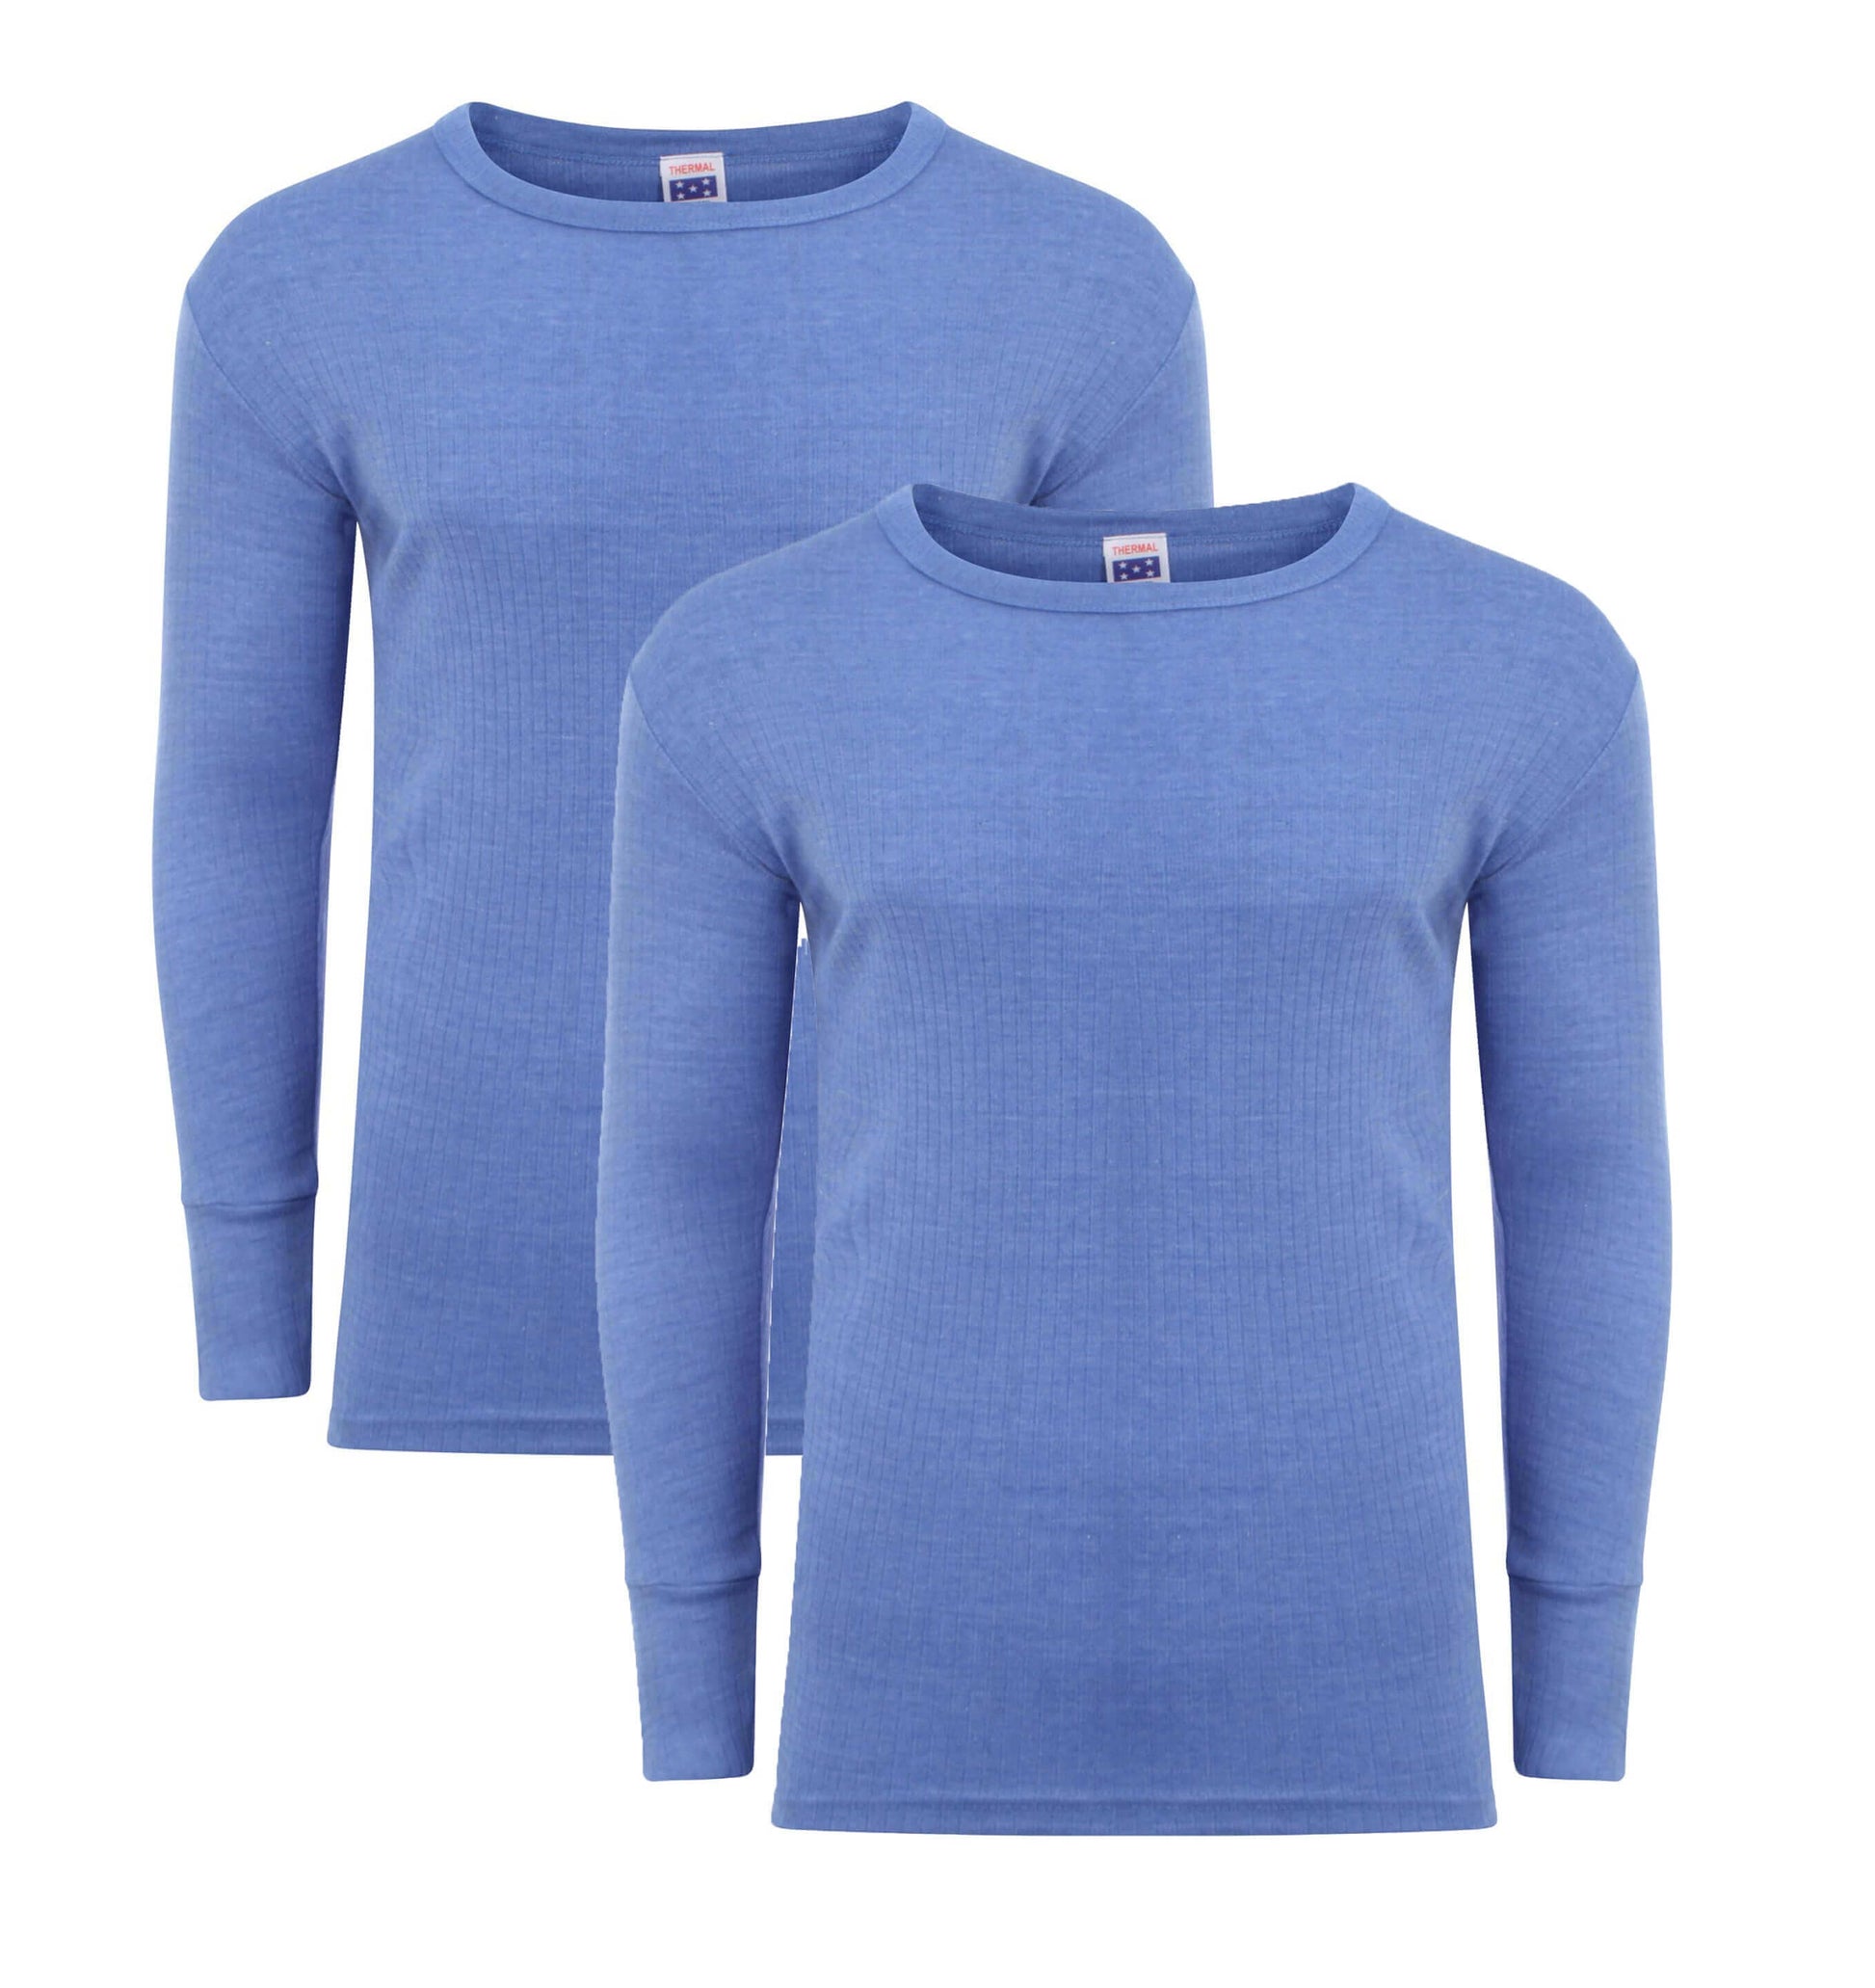 Heatwave® Pack Of 2 Men's Thermal Long Sleeve Top, Warm Underwear  Baselayer. Buy Now For £12.00.